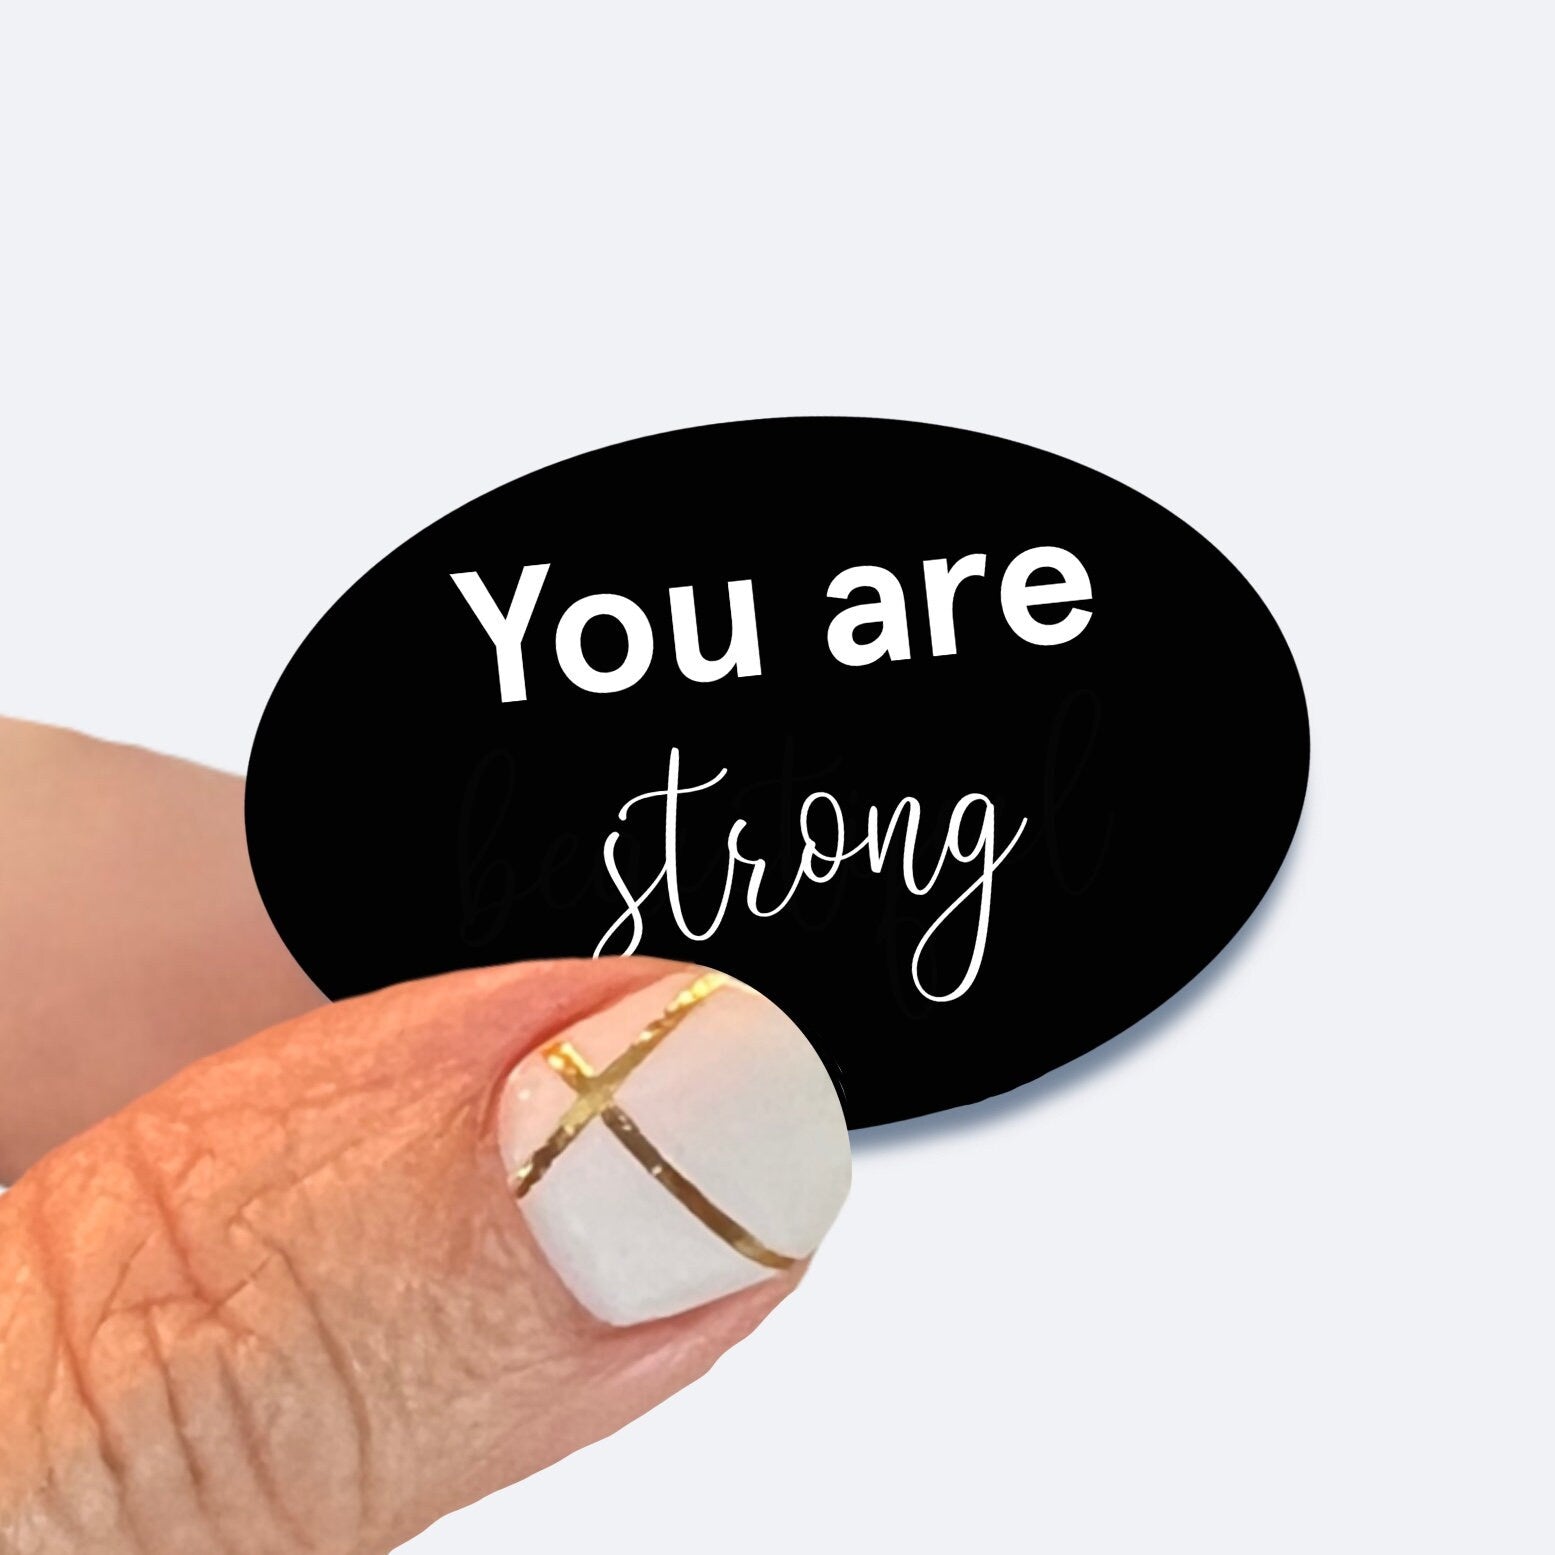 You are strong - UV/ Waterproof Vinyl Sticker/ Decal- Choice of Size, Single or Bulk quantities